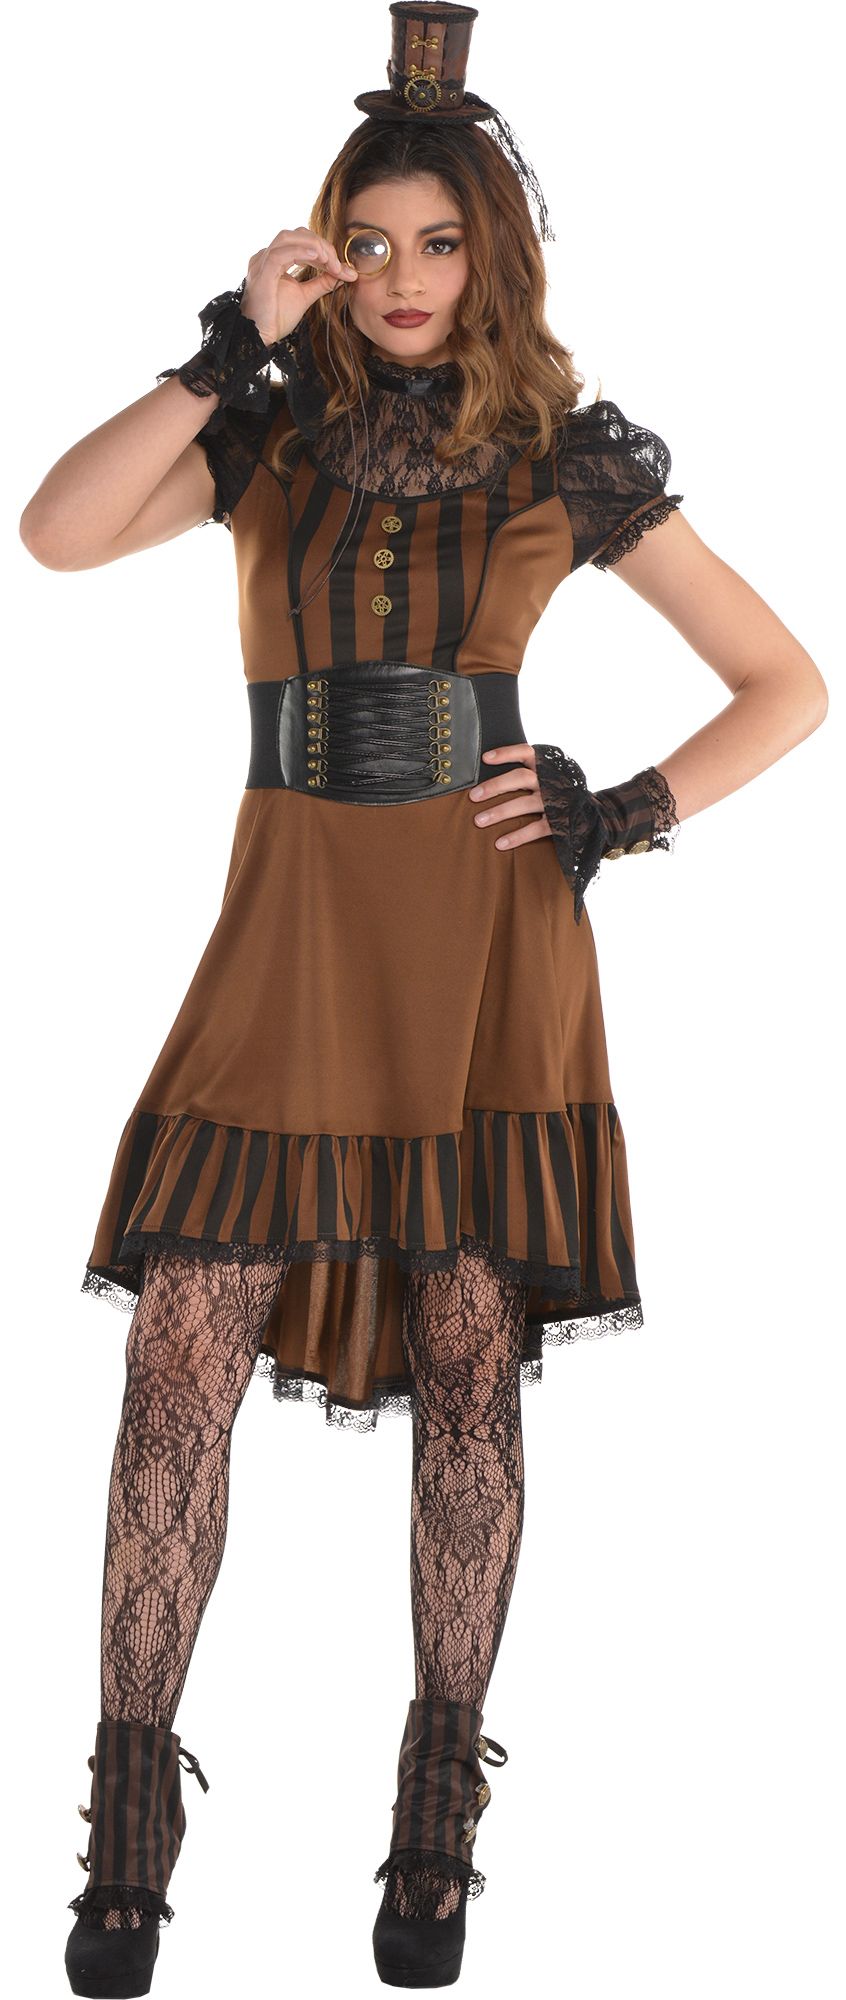 Women's Steampunk Accessories | Party City